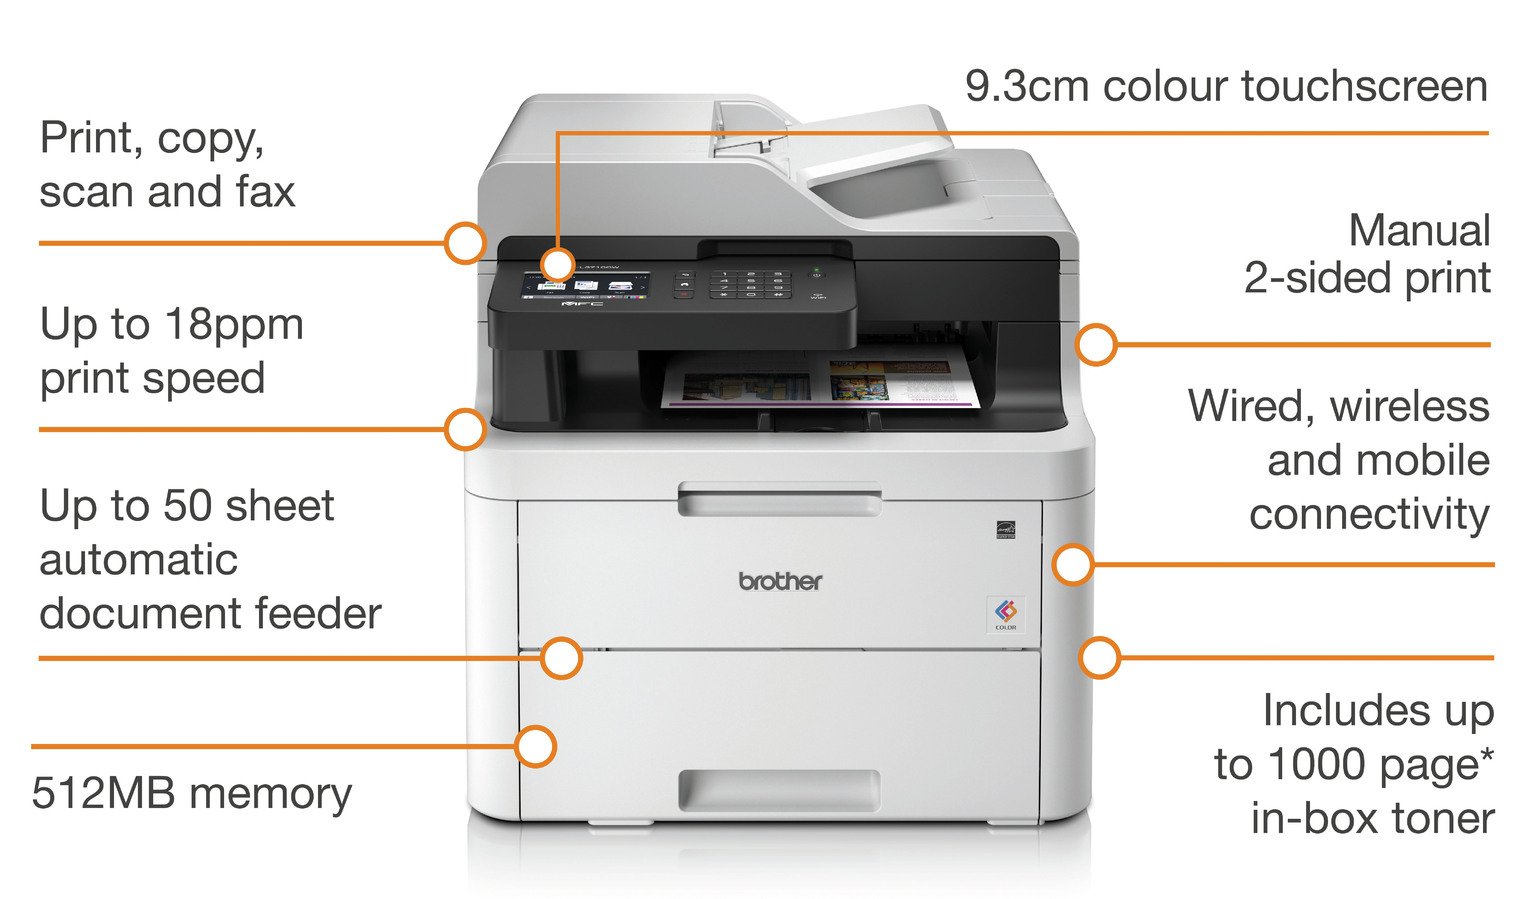 Brother MFC-L3710CW Wireless Colour Laser Printer Review